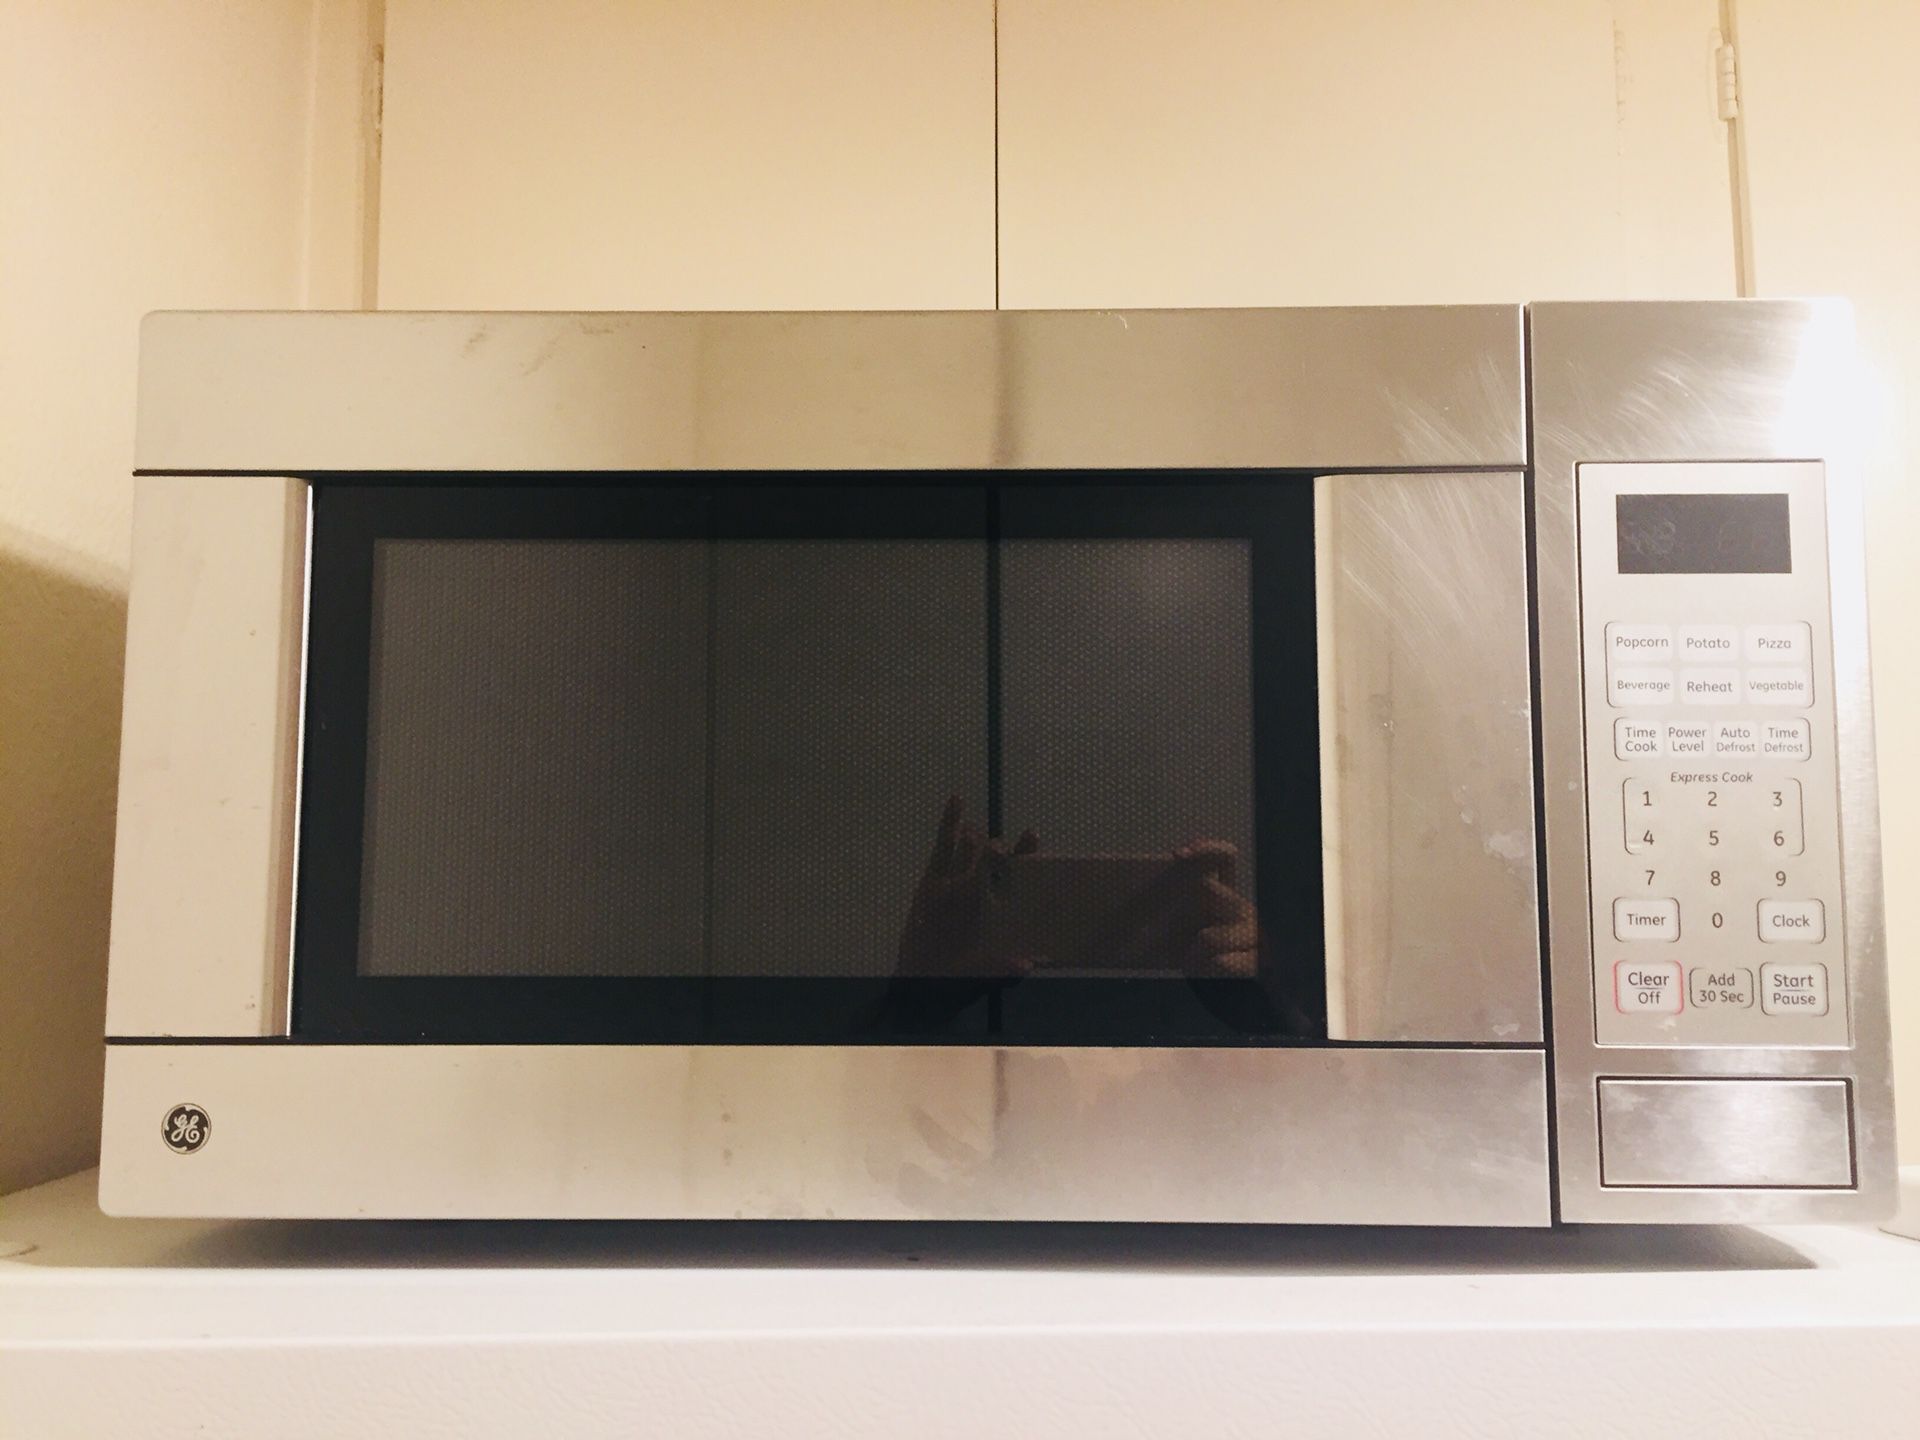 ***Moving Sale*** GE Microwave oven